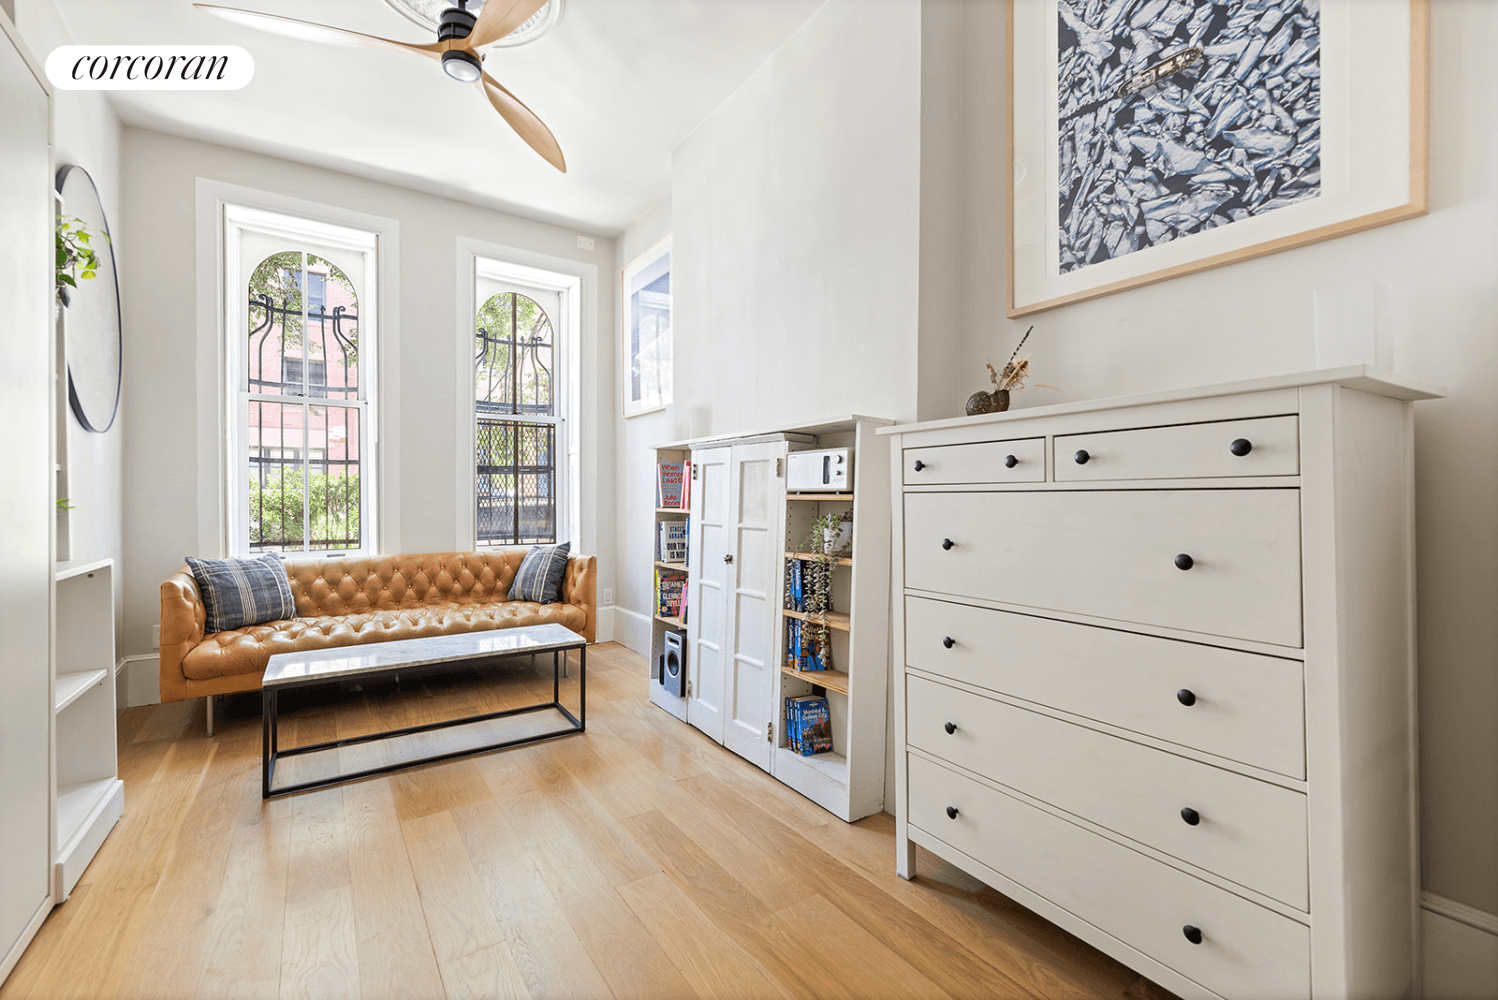 Welcome home to the peaceful and charming West Village.